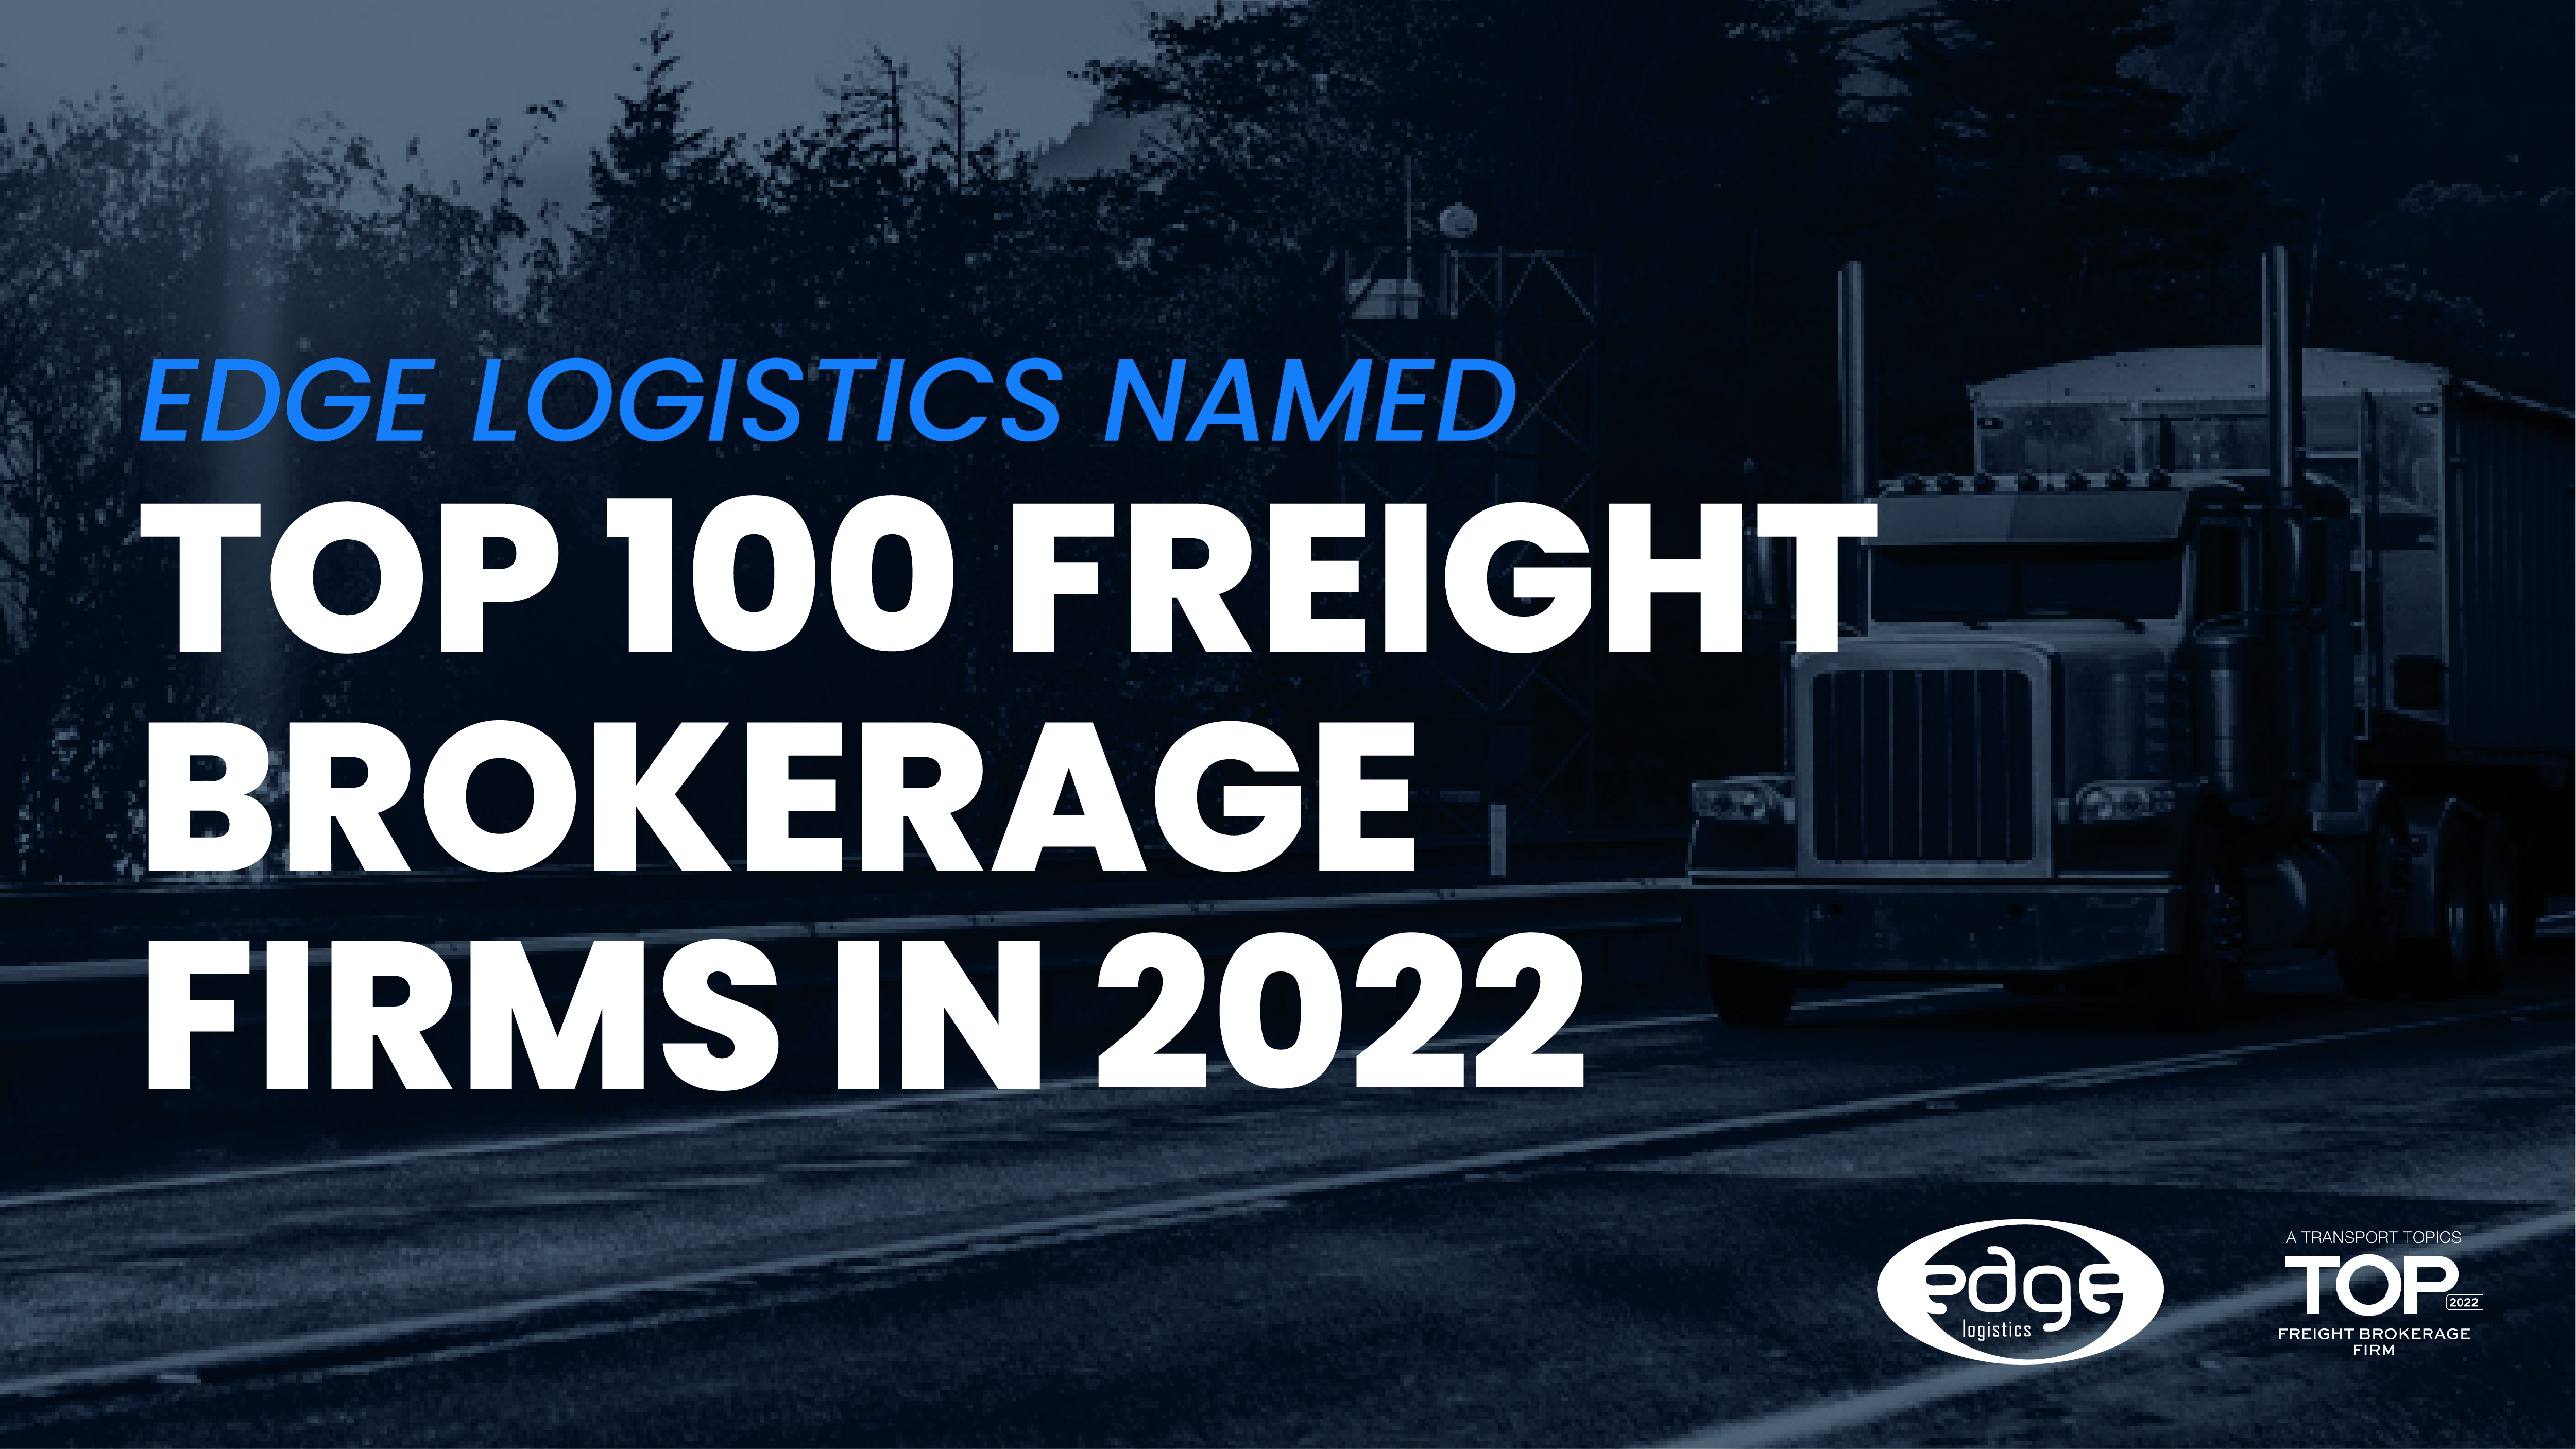 Edge Logistics Recognized as Transport Topics Top 100 Freight Brokerage Firms in 2022